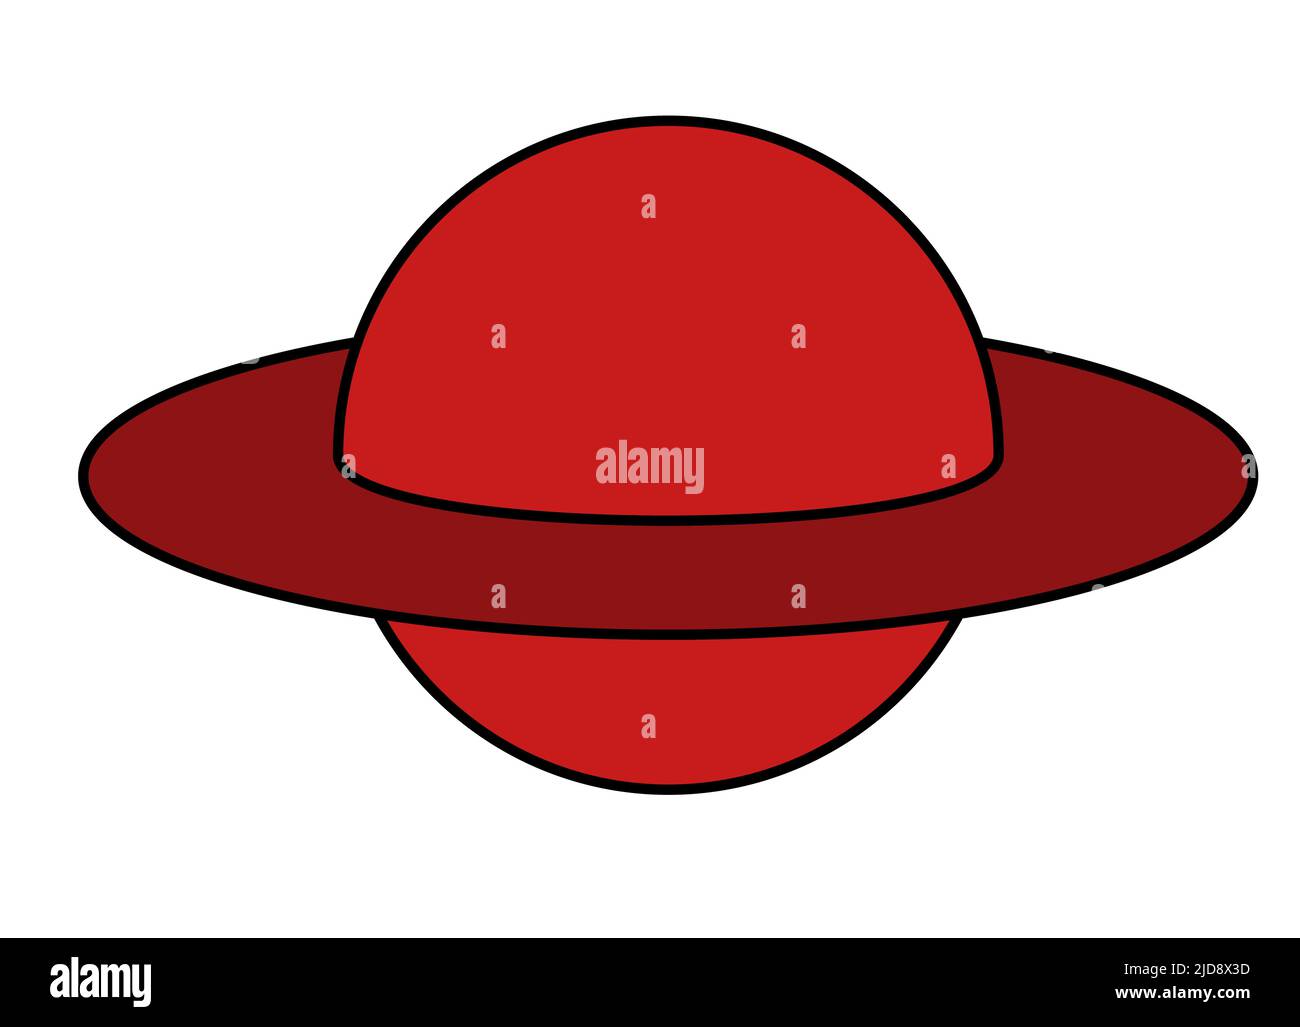 A graphic illustration of a Ringed Planet in Red for use as an icon, logo or web decoration Stock Photo